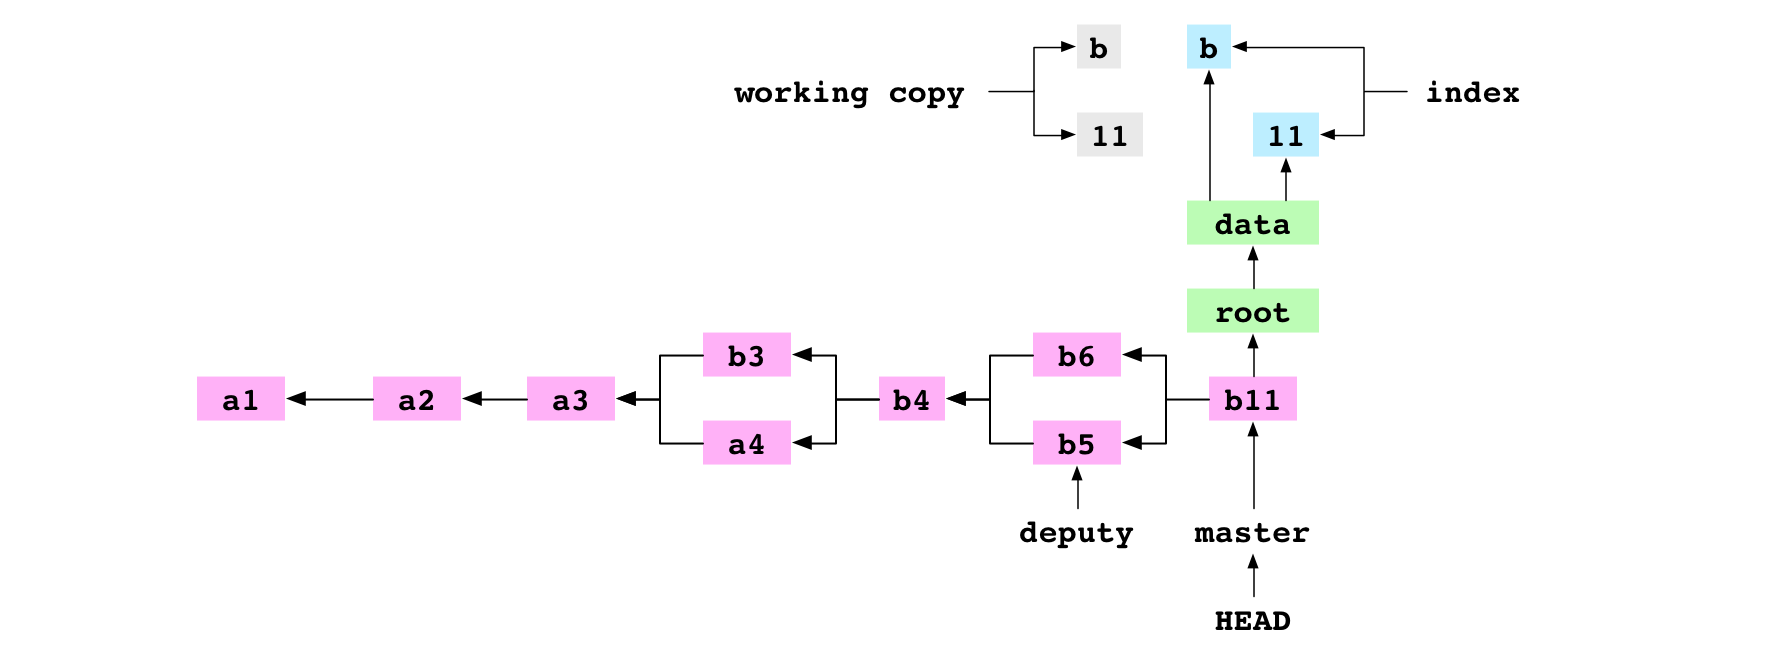 The working copy, index, b11 commit and its tree graph